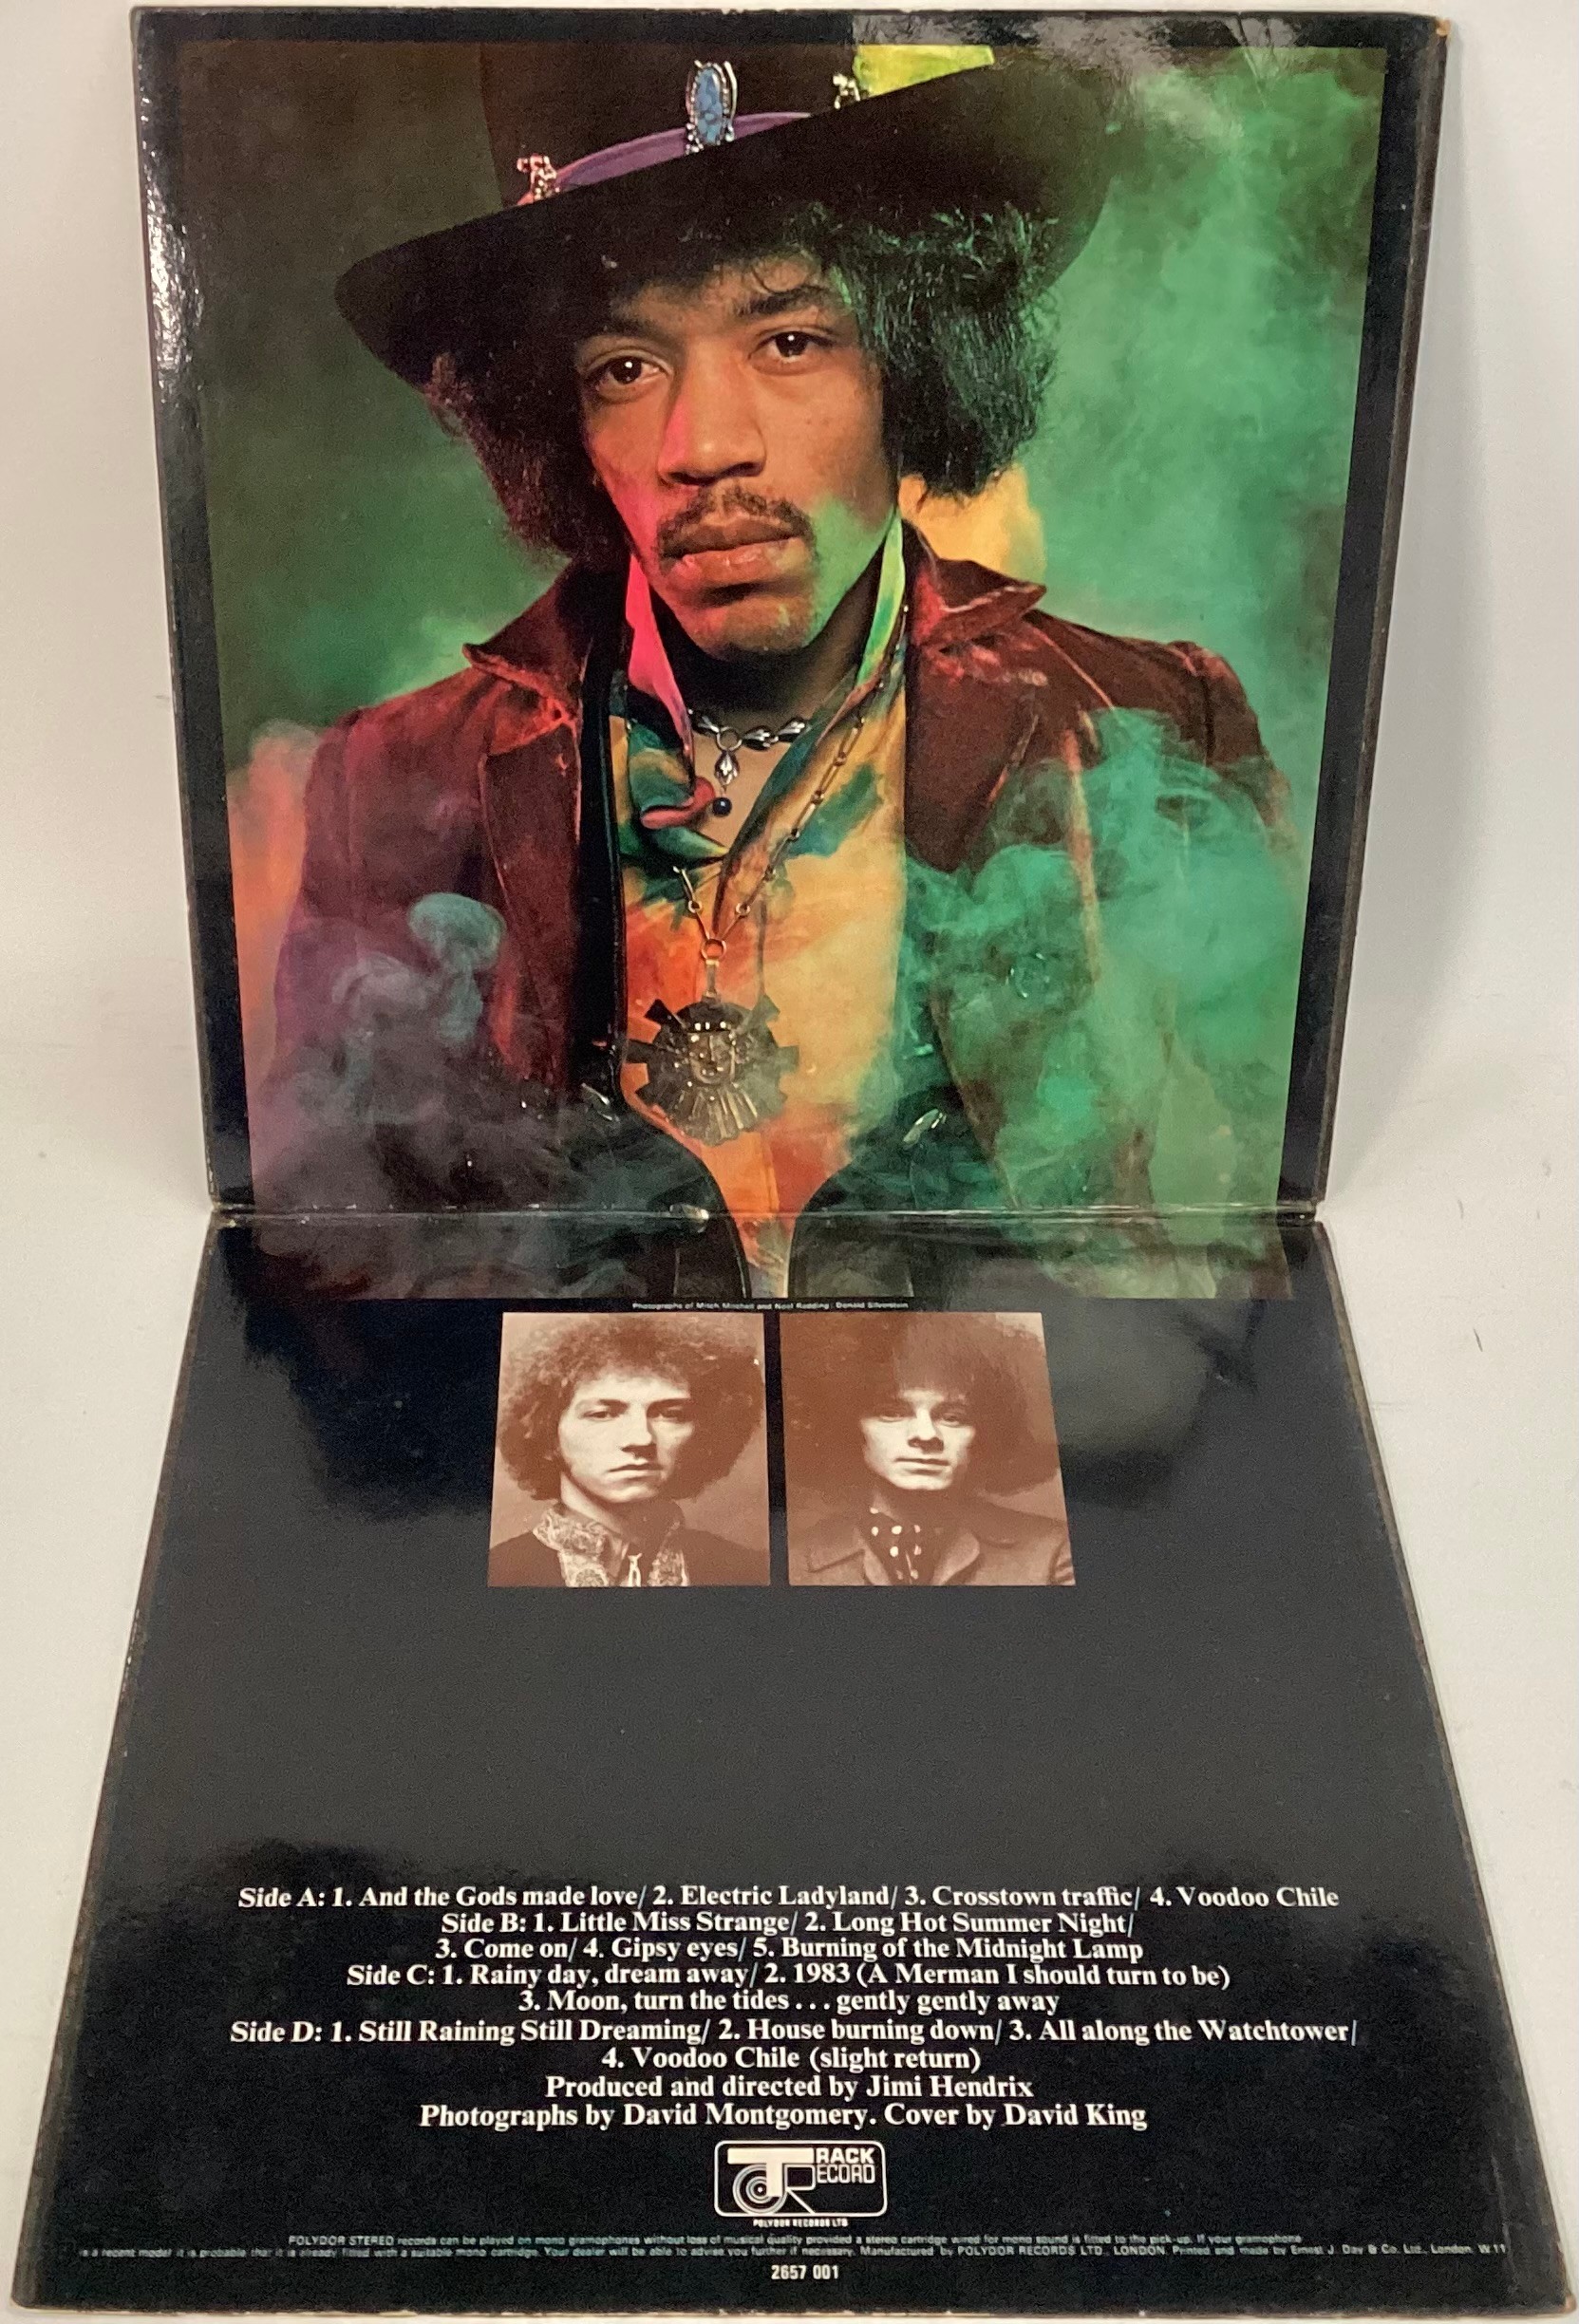 JIMI HENDRIX VINL LP RECORD ‘ELECTRIC LADYLAND’ WITH FULLY LAMINATED SLEEVE. Found here on The Track - Image 2 of 4